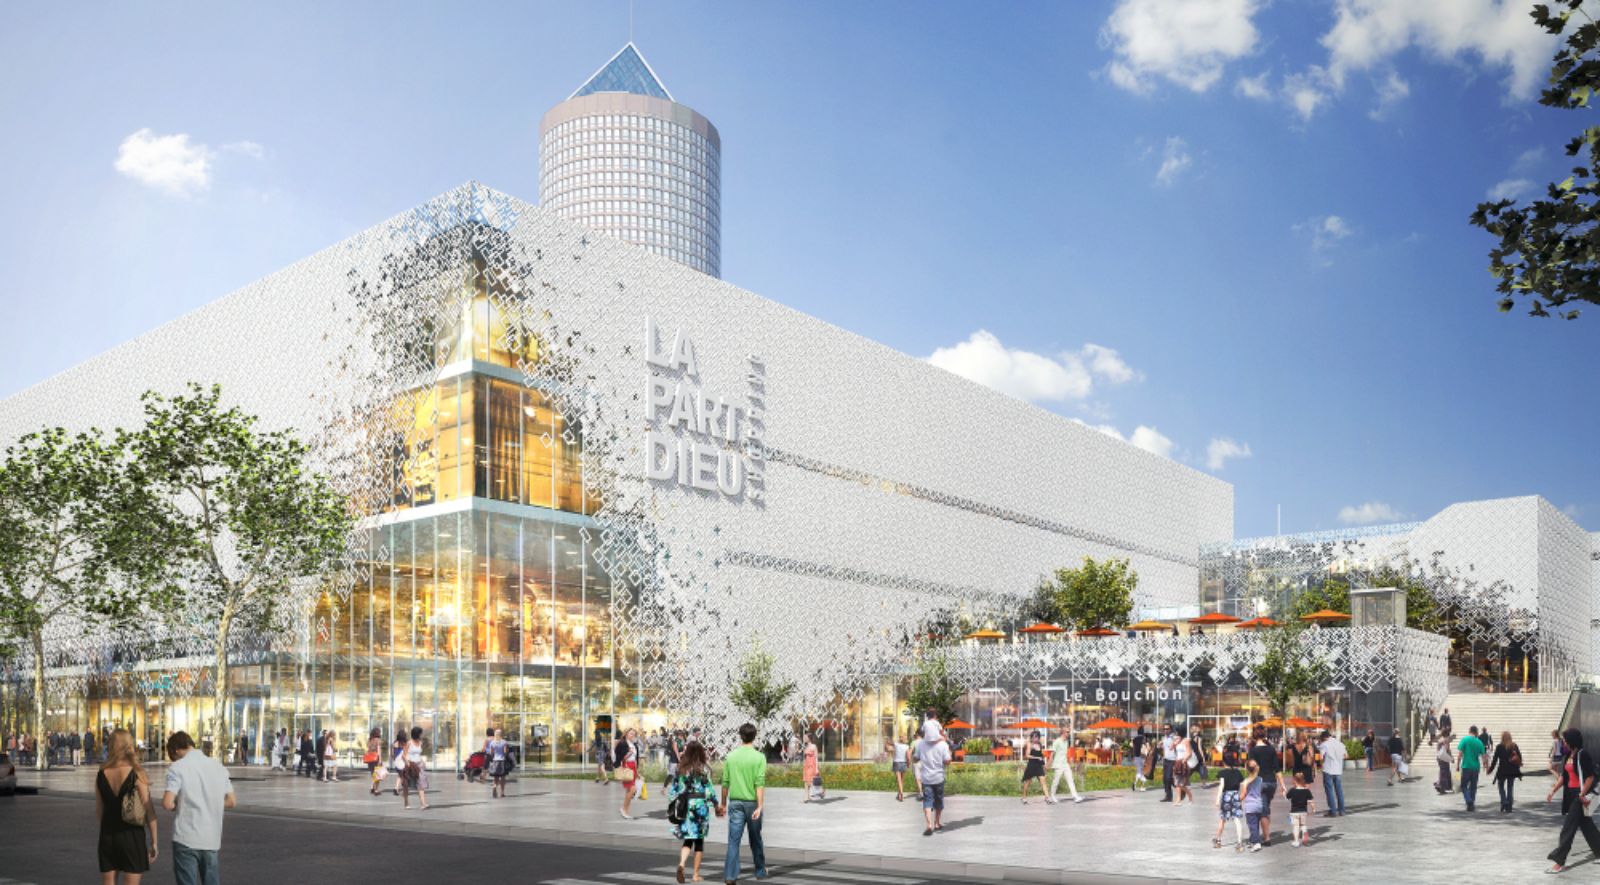 Transformation of shopping centre Part-Dieu in Lyon